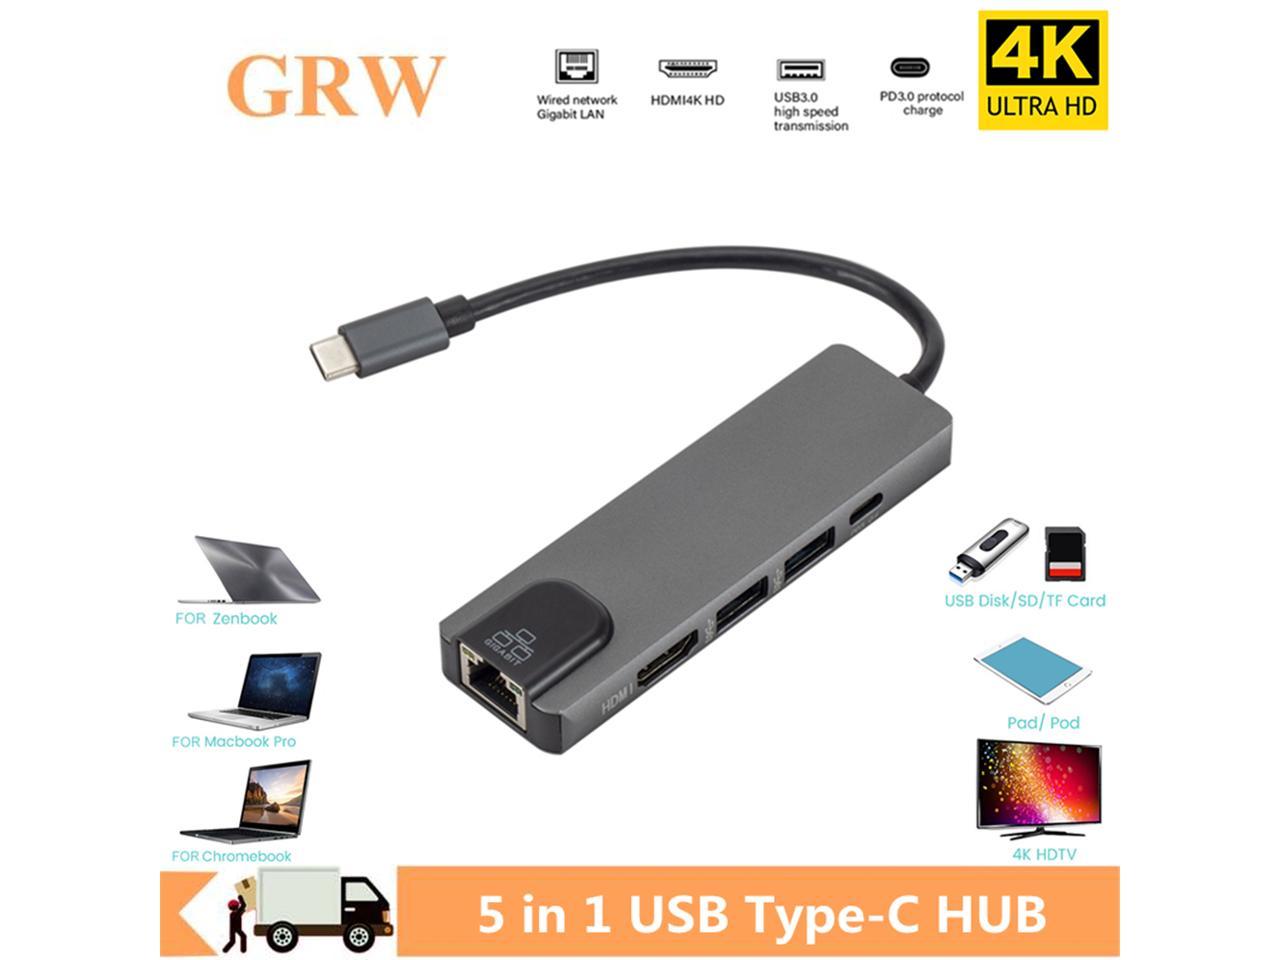 5 in1 USB 3.1 Type C Hub 4K Hdmi USB 3.0 to Rj45 Lan Adapter Charger for Macbook